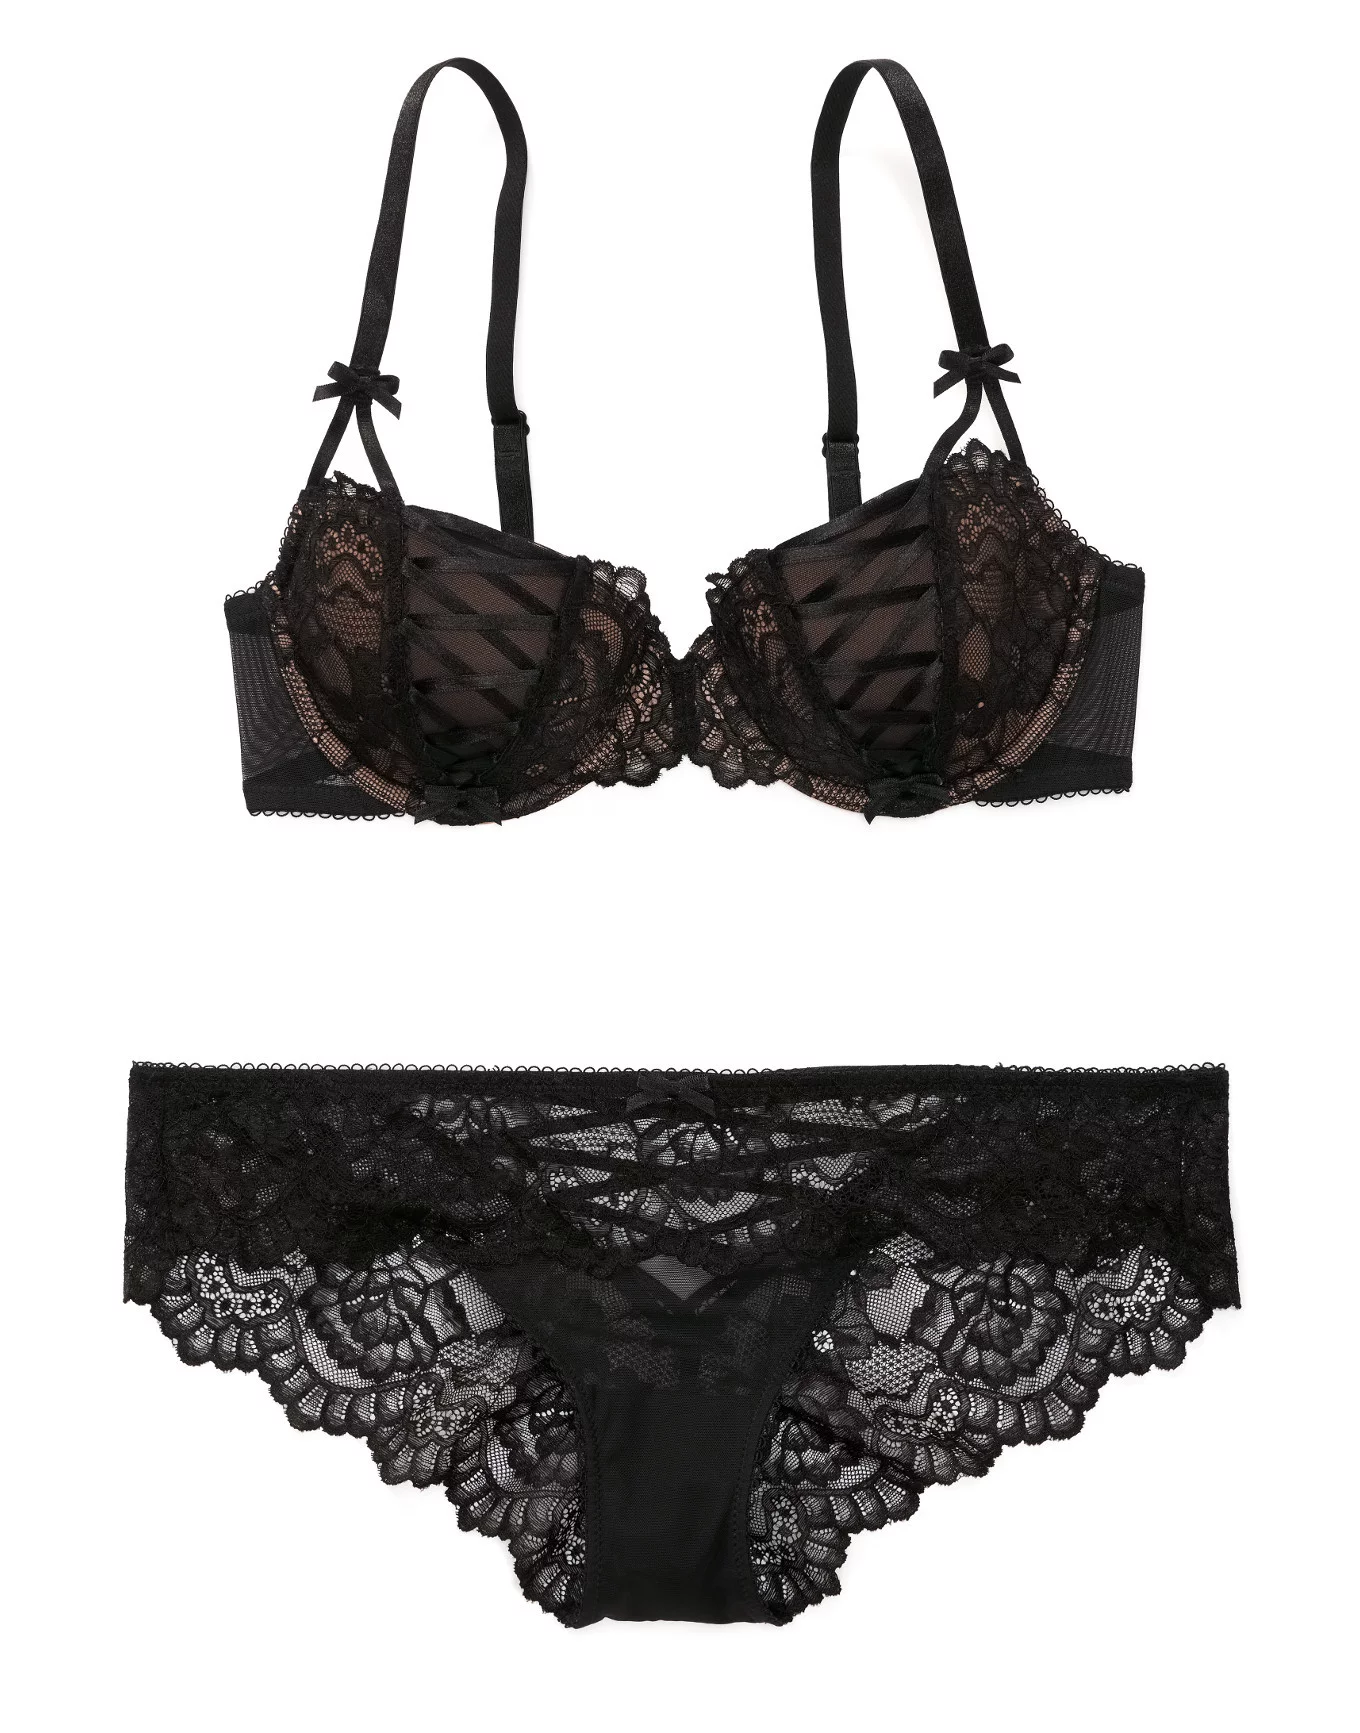 adorableessentials.ke - BLACK DIARIES Pretty black deep cup bra size 42DD  Beautiful seamless lace panty size 18 *items matched to color Bra@sh900  Panty@sh300 Visit shopF10 upstairs at Elegant Exhibition Rahimtulla bldg  next